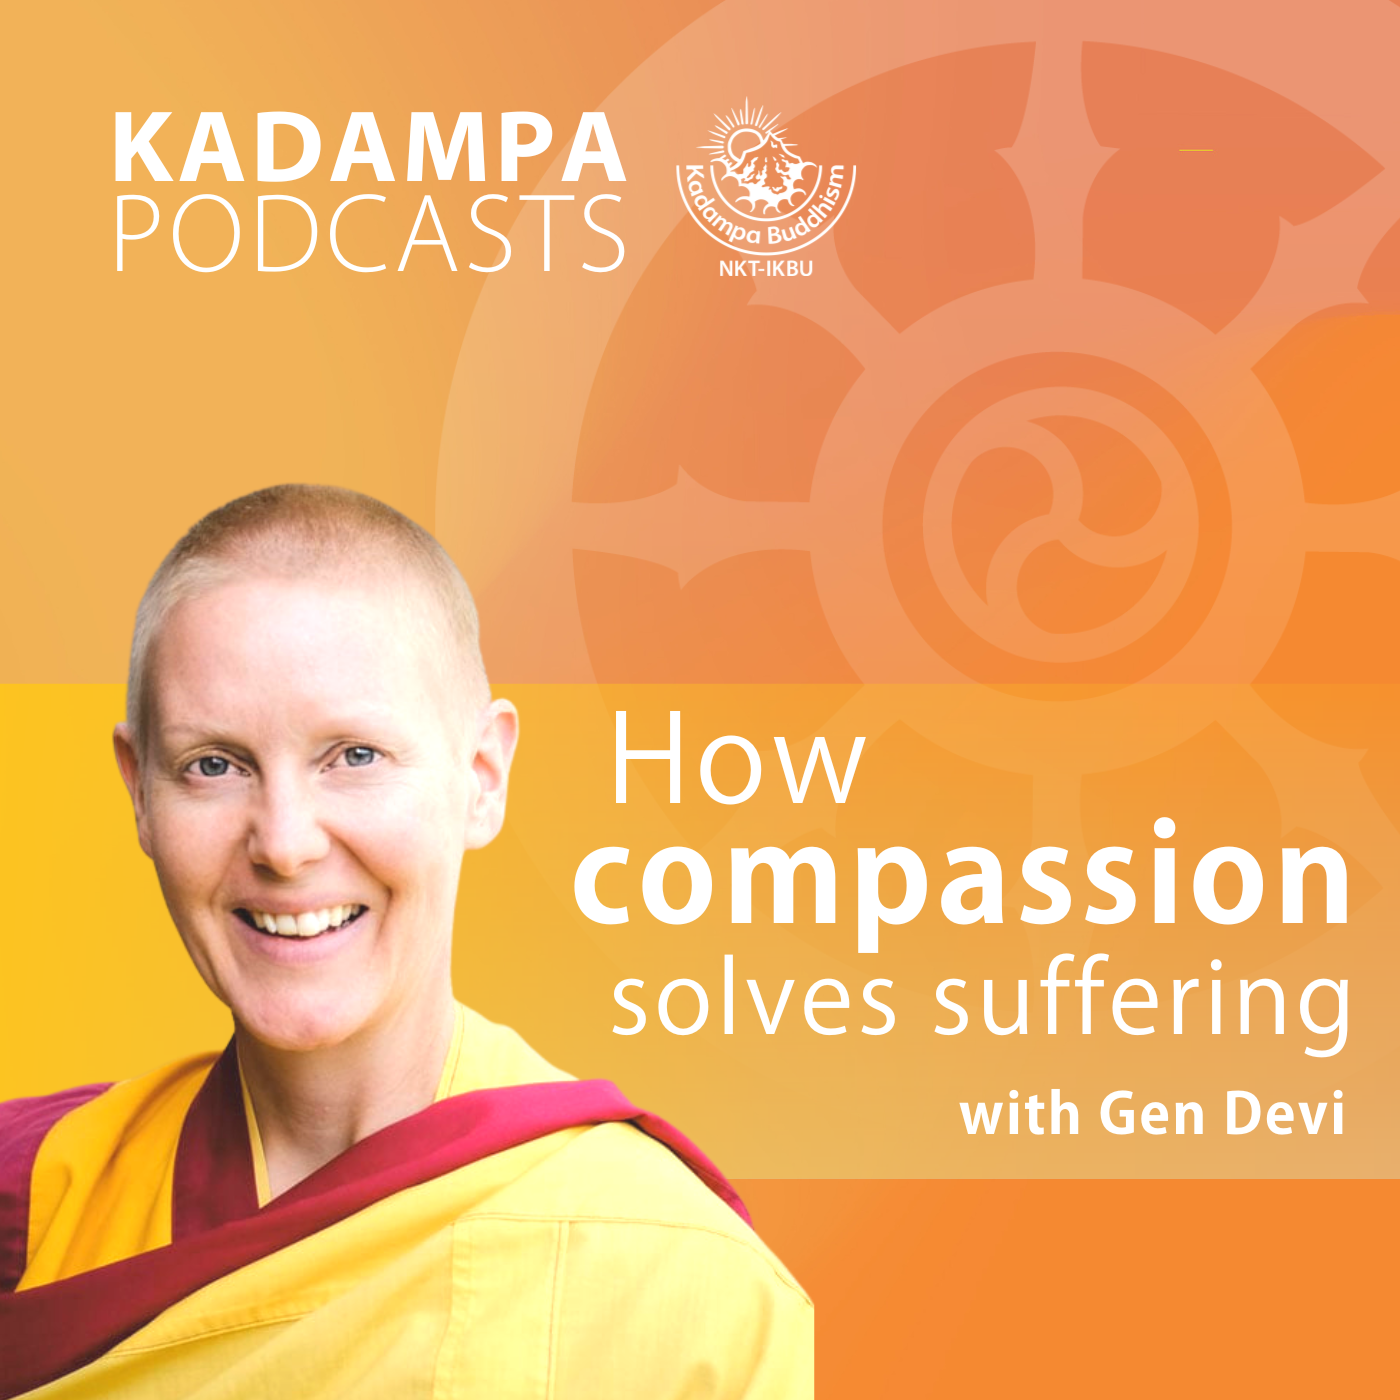 How compassion solves suffering